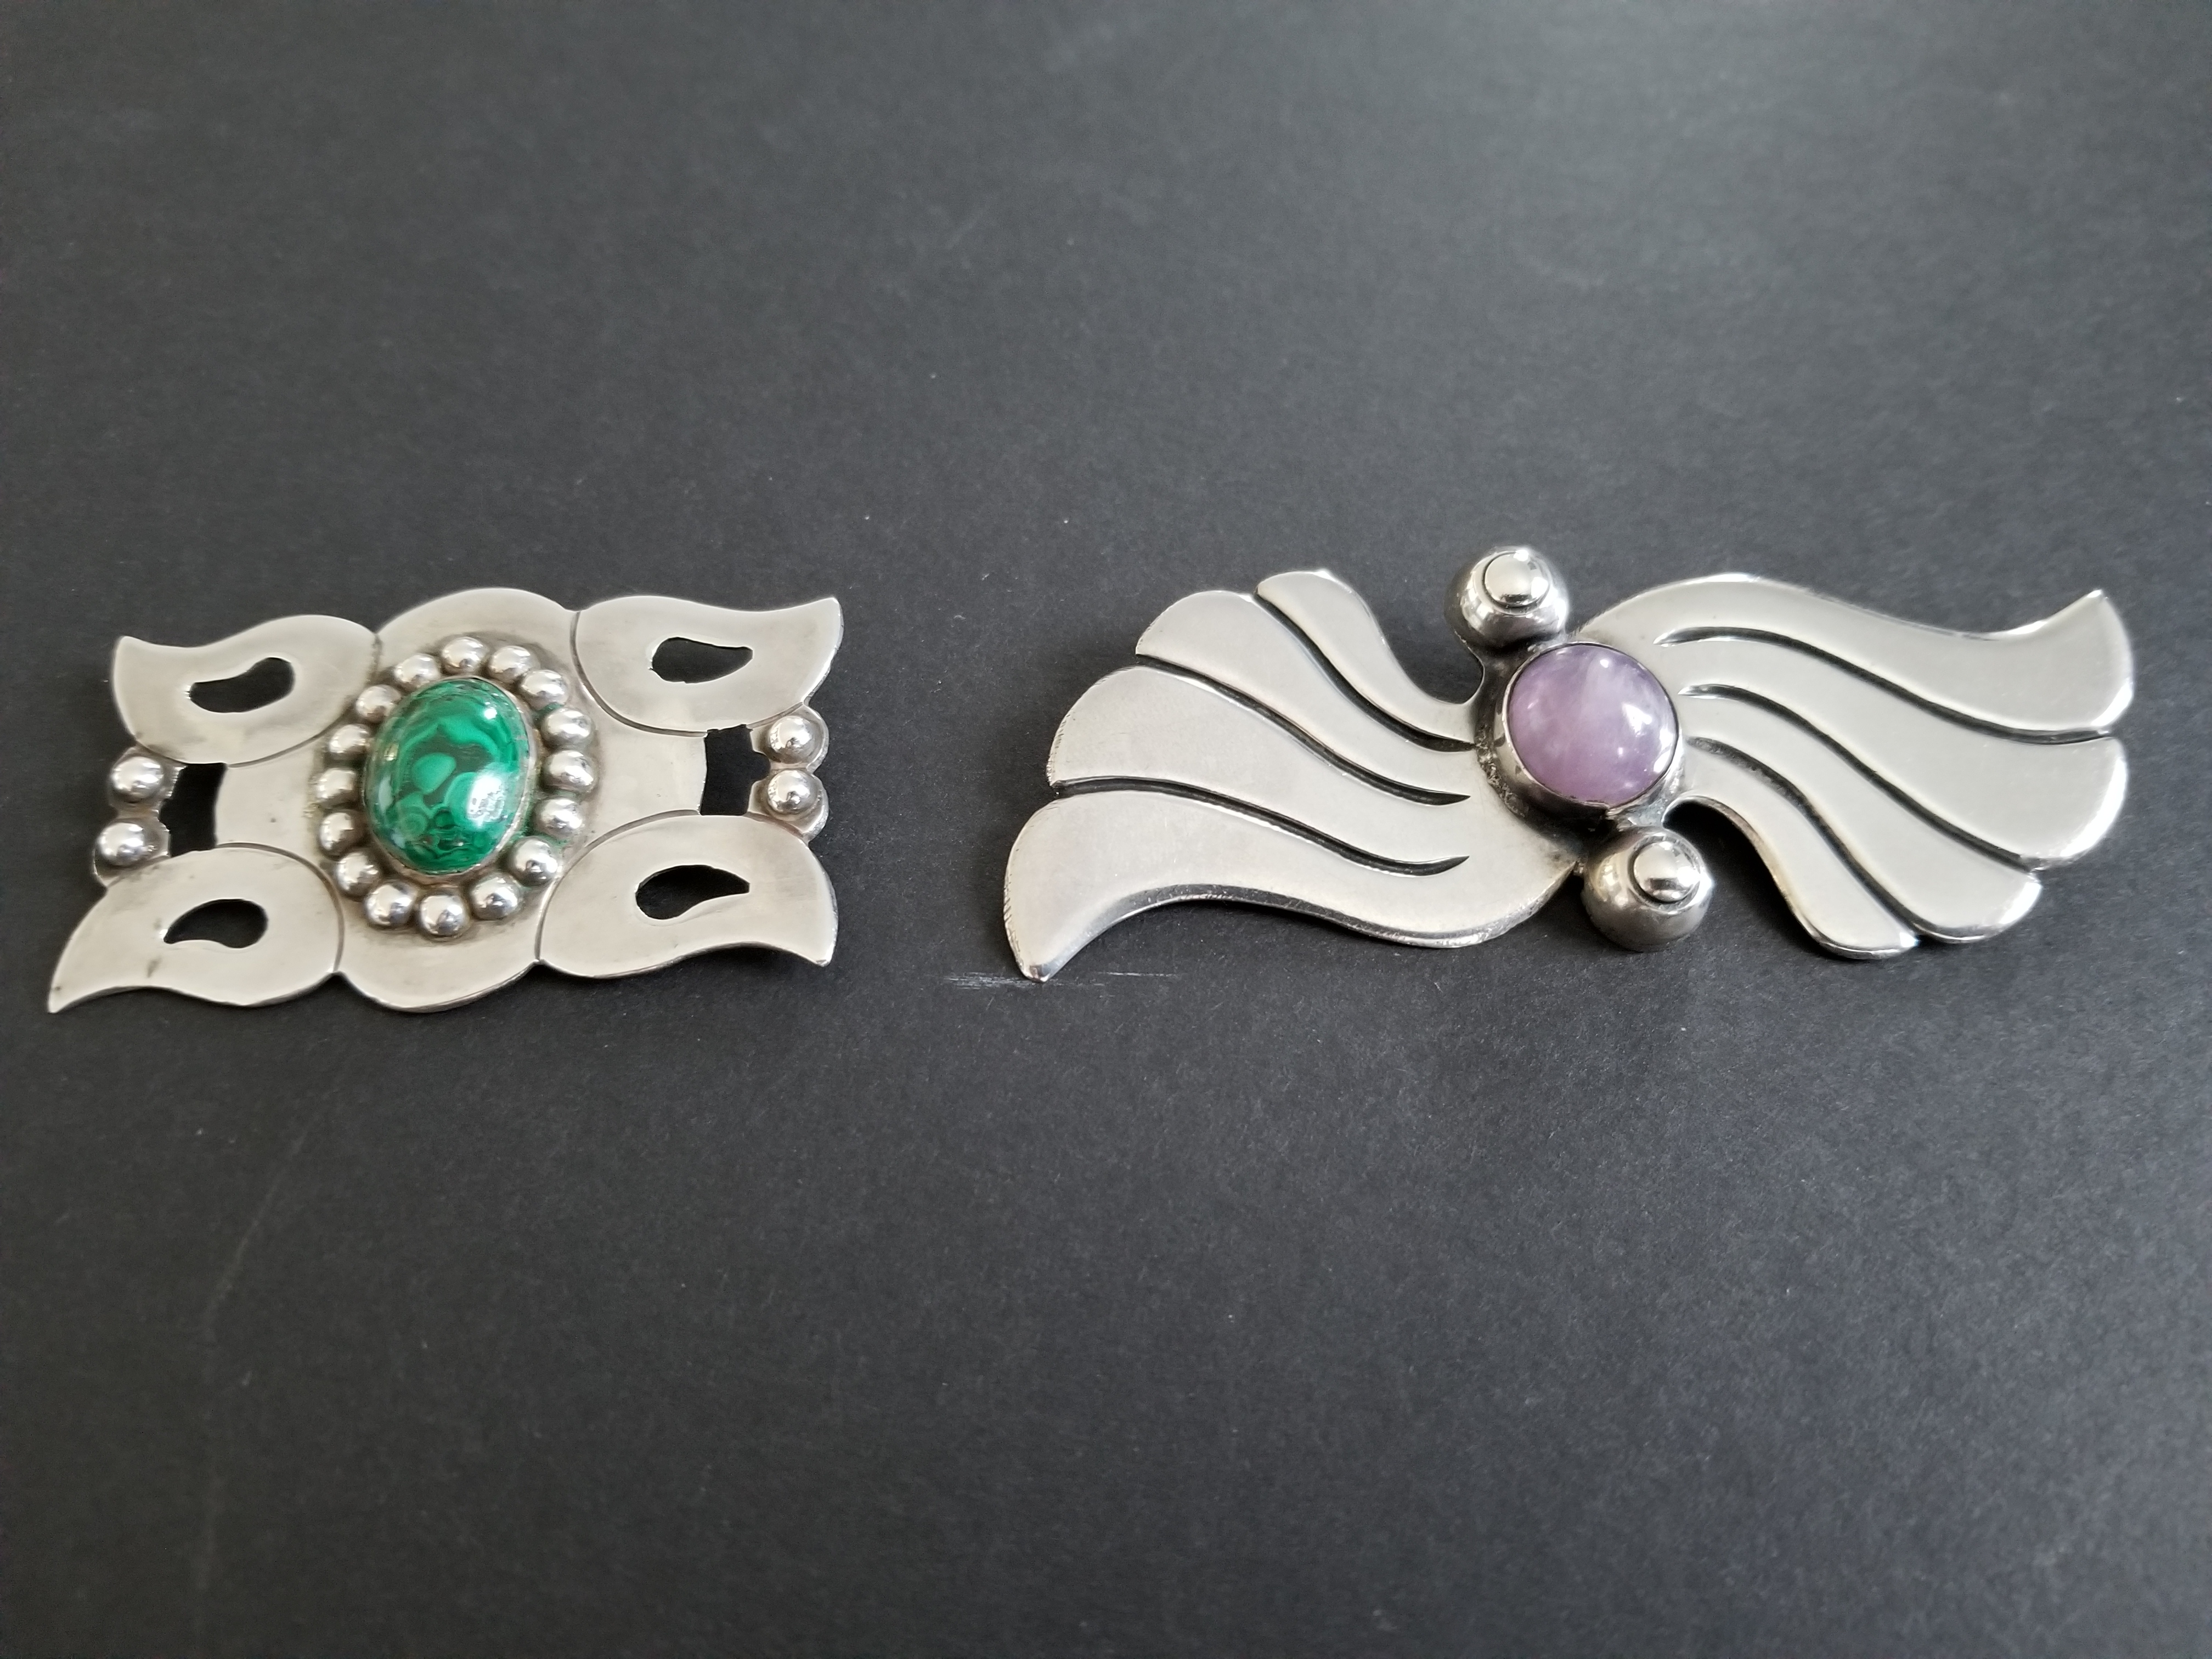 2 WING SHAPED 980 SILVER PINS WITH STONES